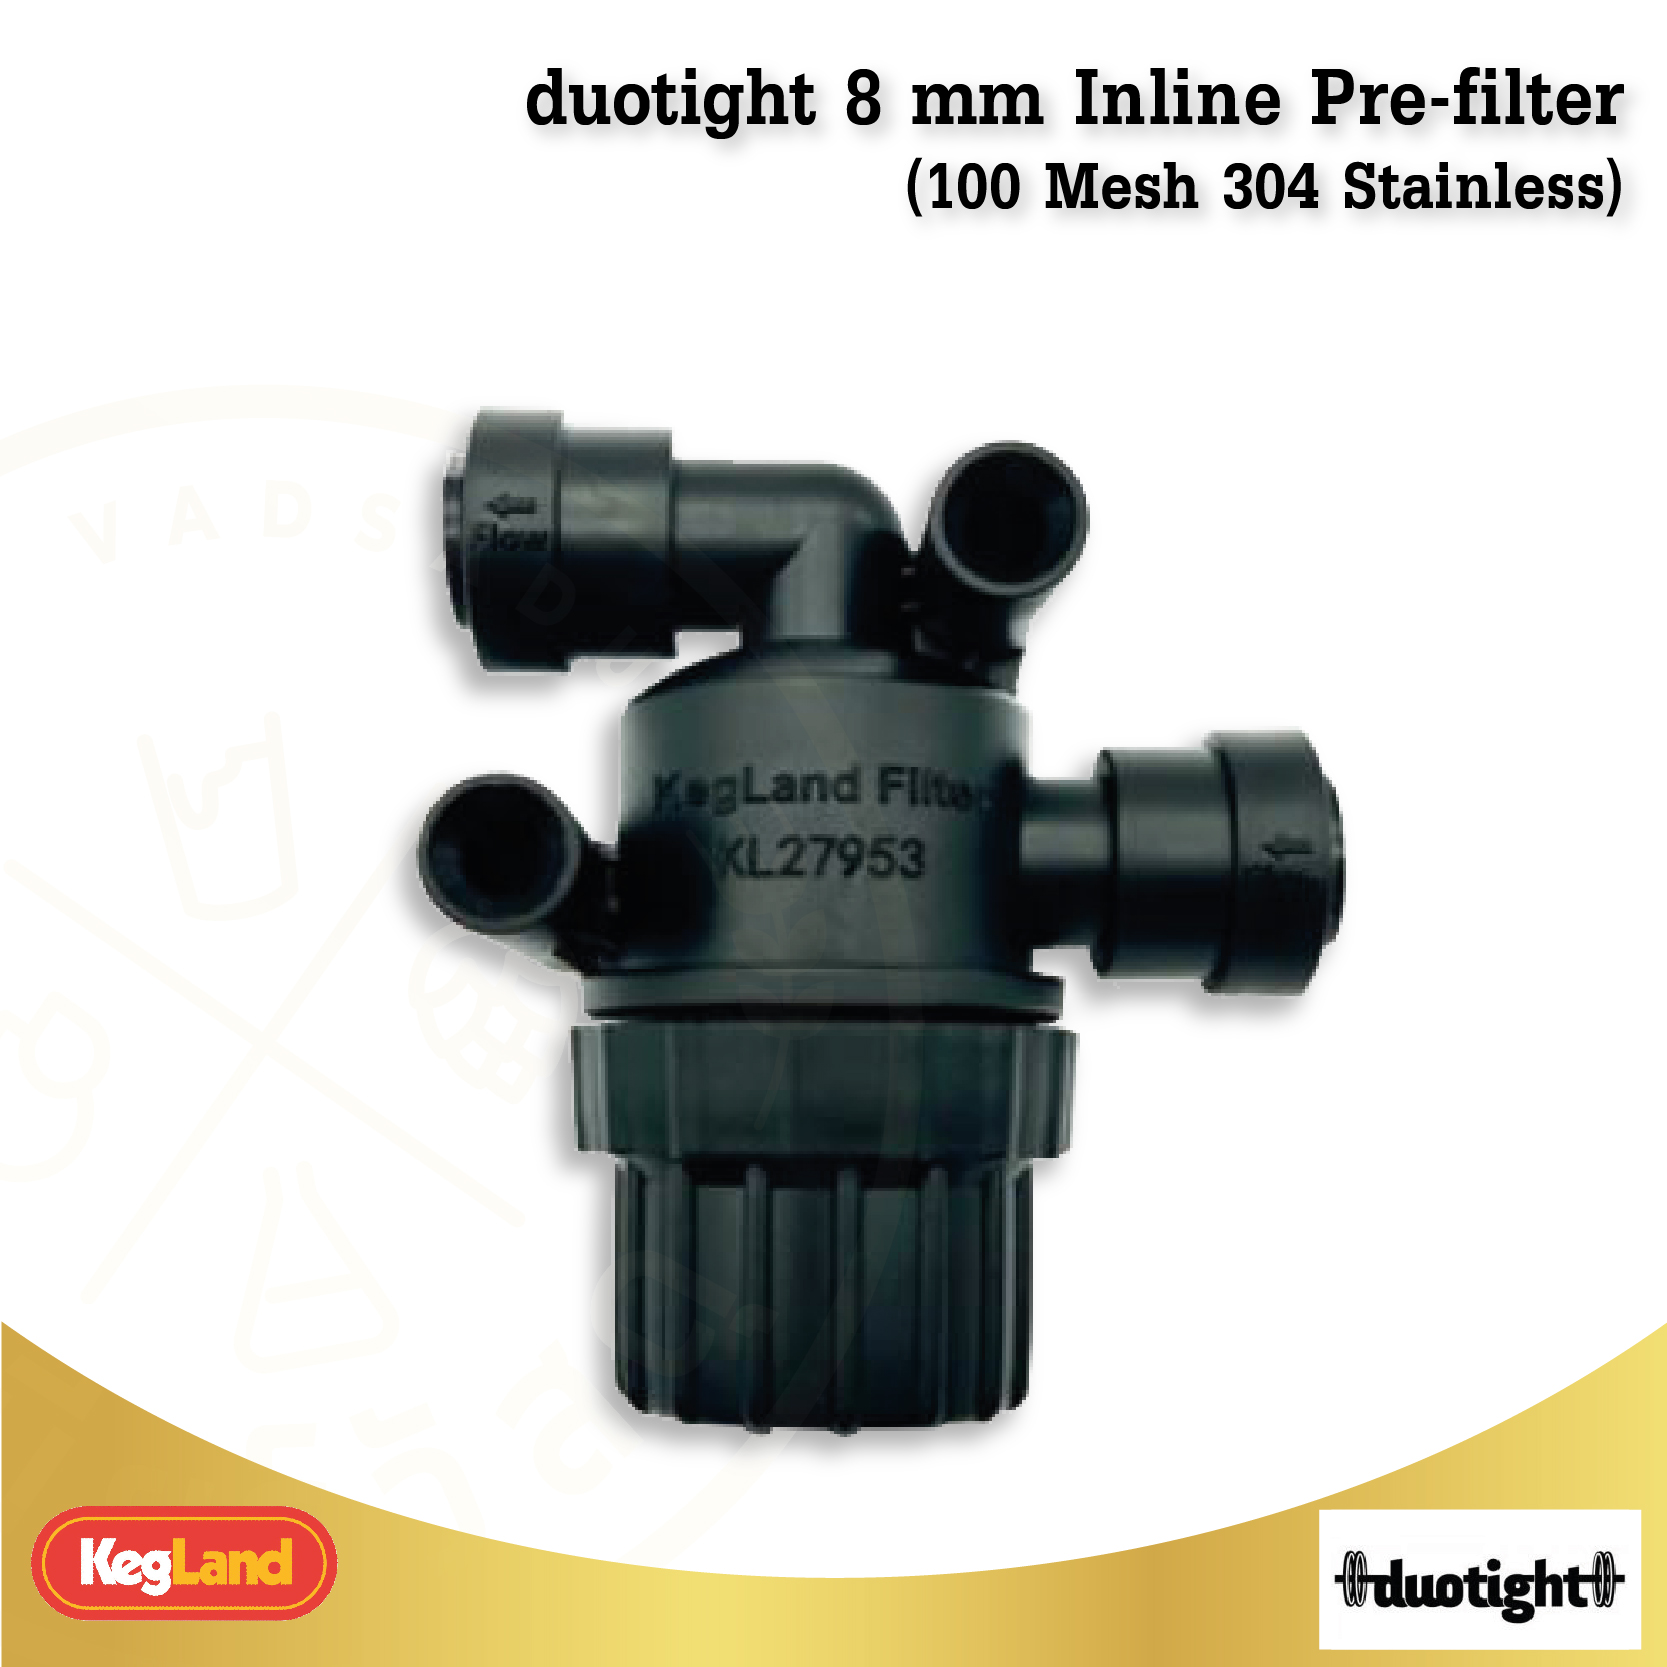 duotight 8 mm Inline Pre-filter (100 Mesh 304 Stainless)